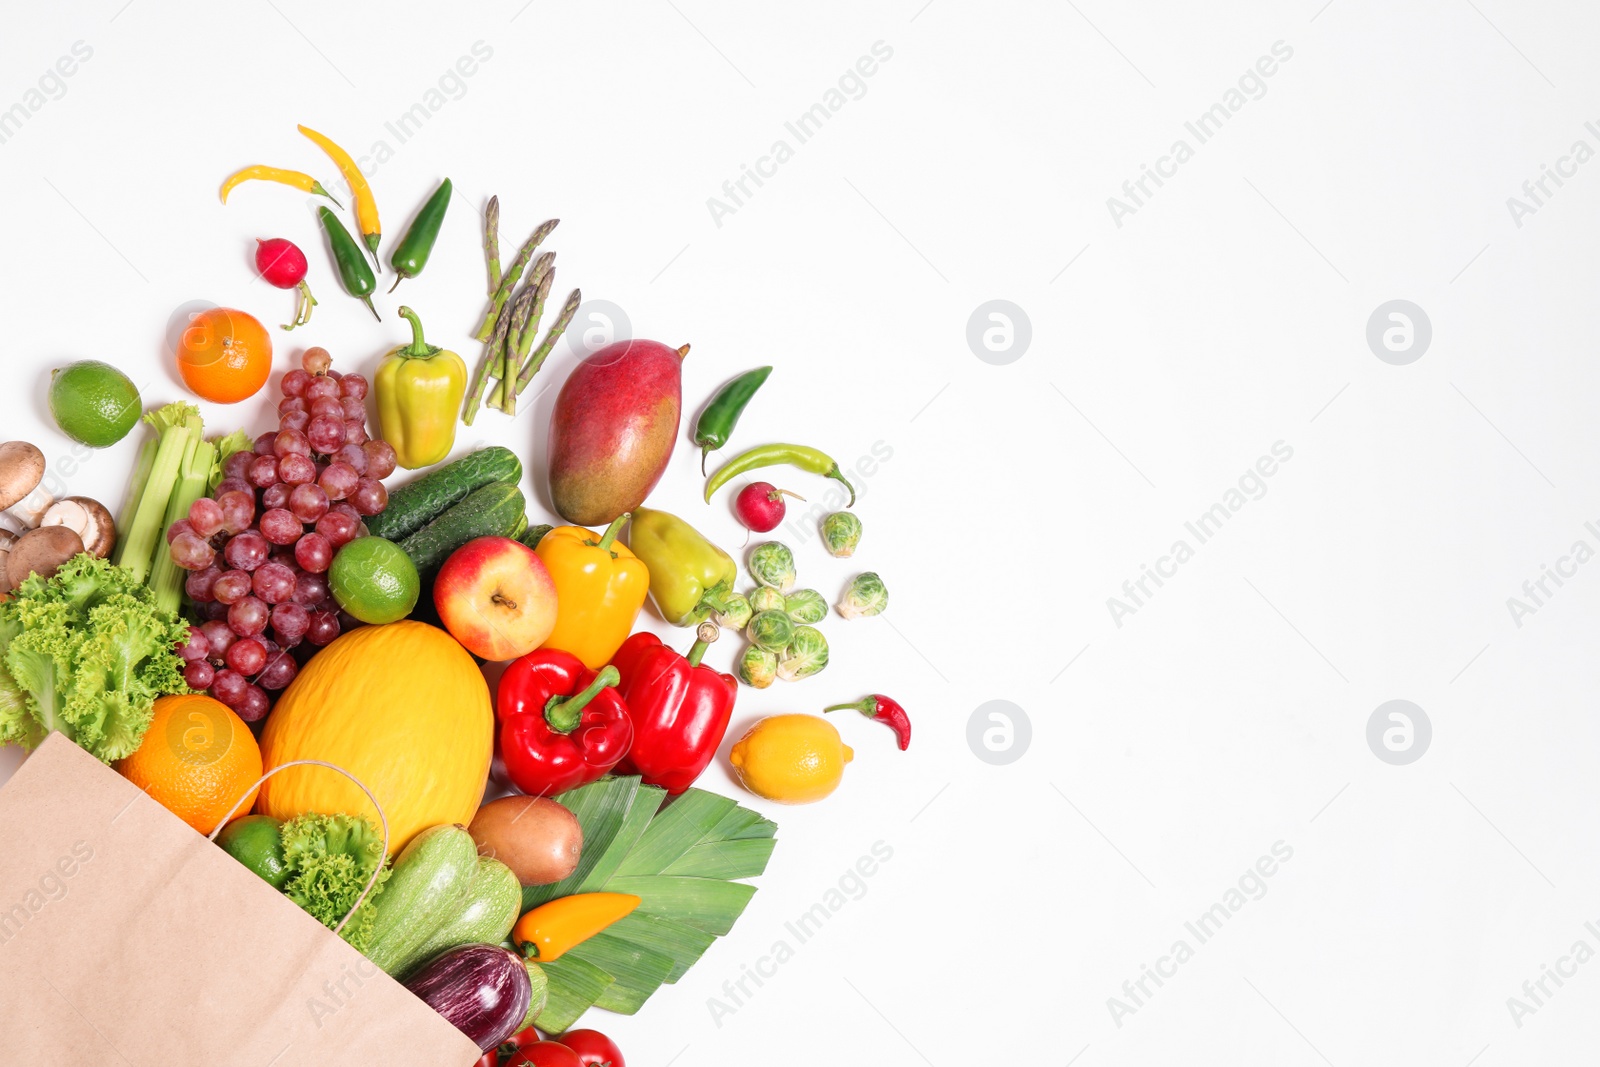 Photo of Paper bag with assortment of fresh organic fruits and vegetables on white background, top view